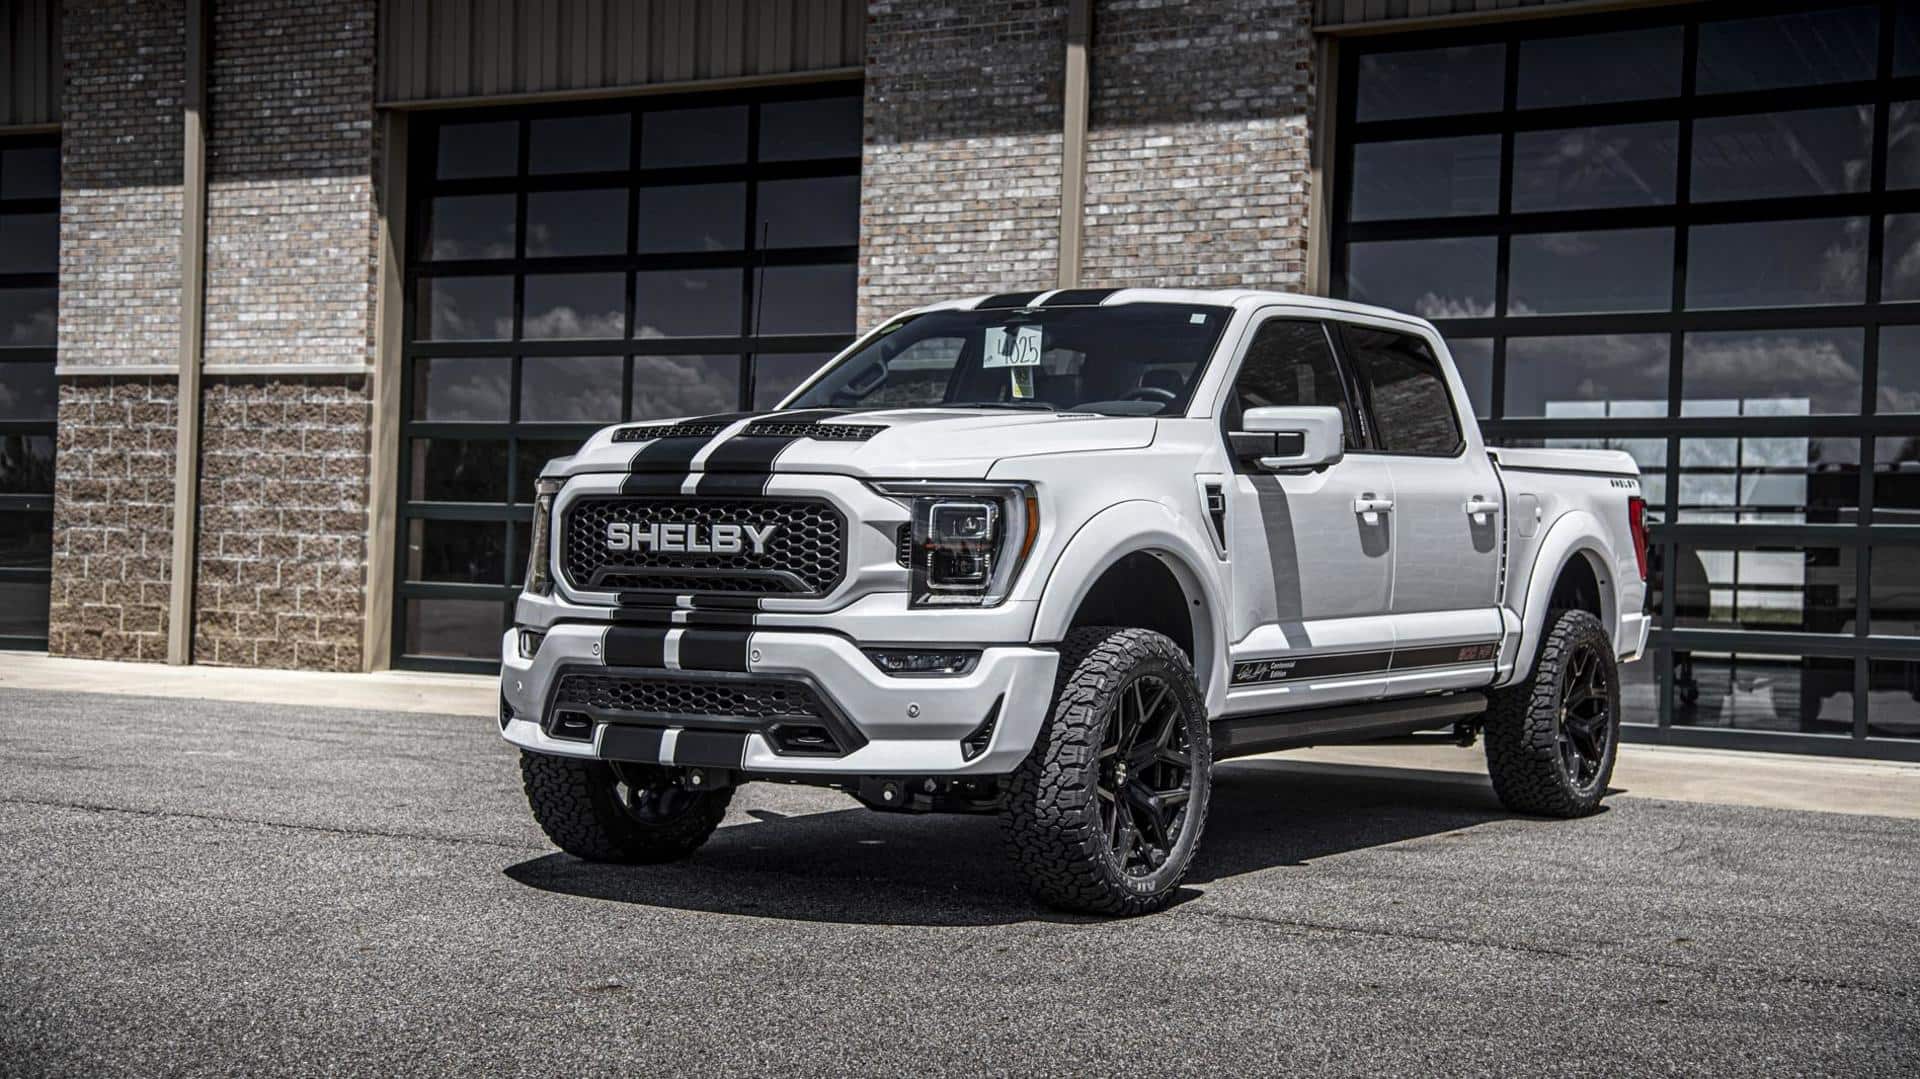 Carroll Shelby Centennial Edition Ford F-150 revealed: Check best features